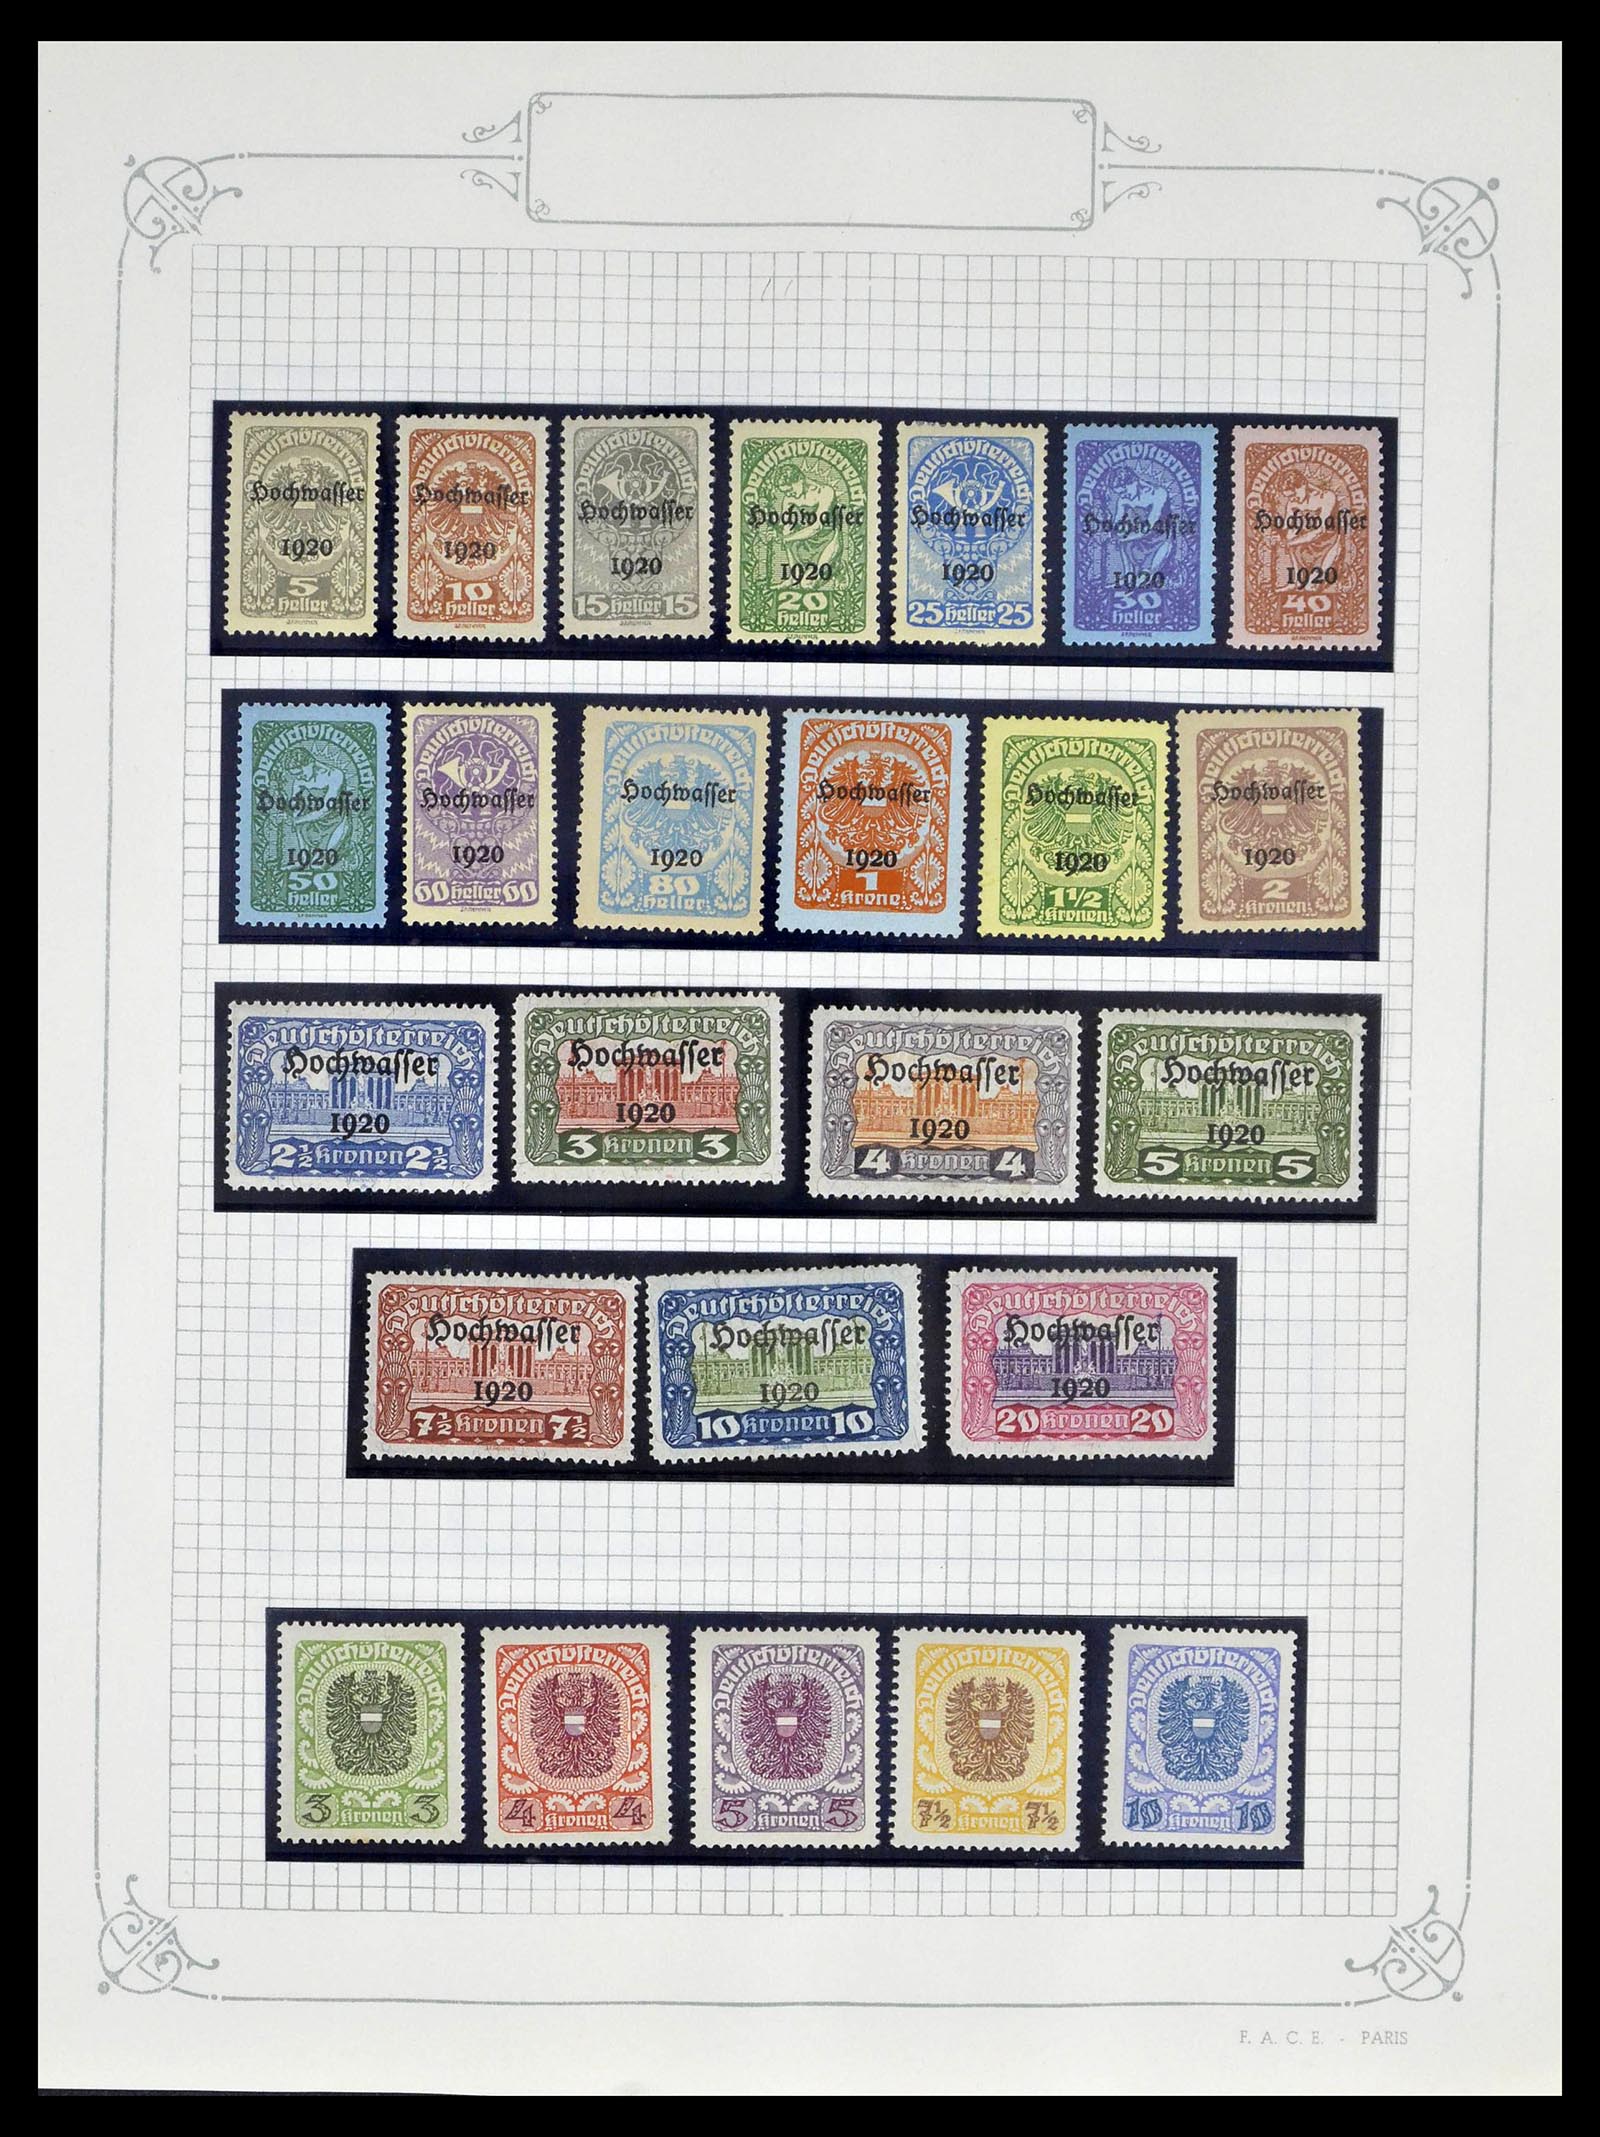 39276 0019 - Stamp collection 39276 Austria and territories 1850-1979.